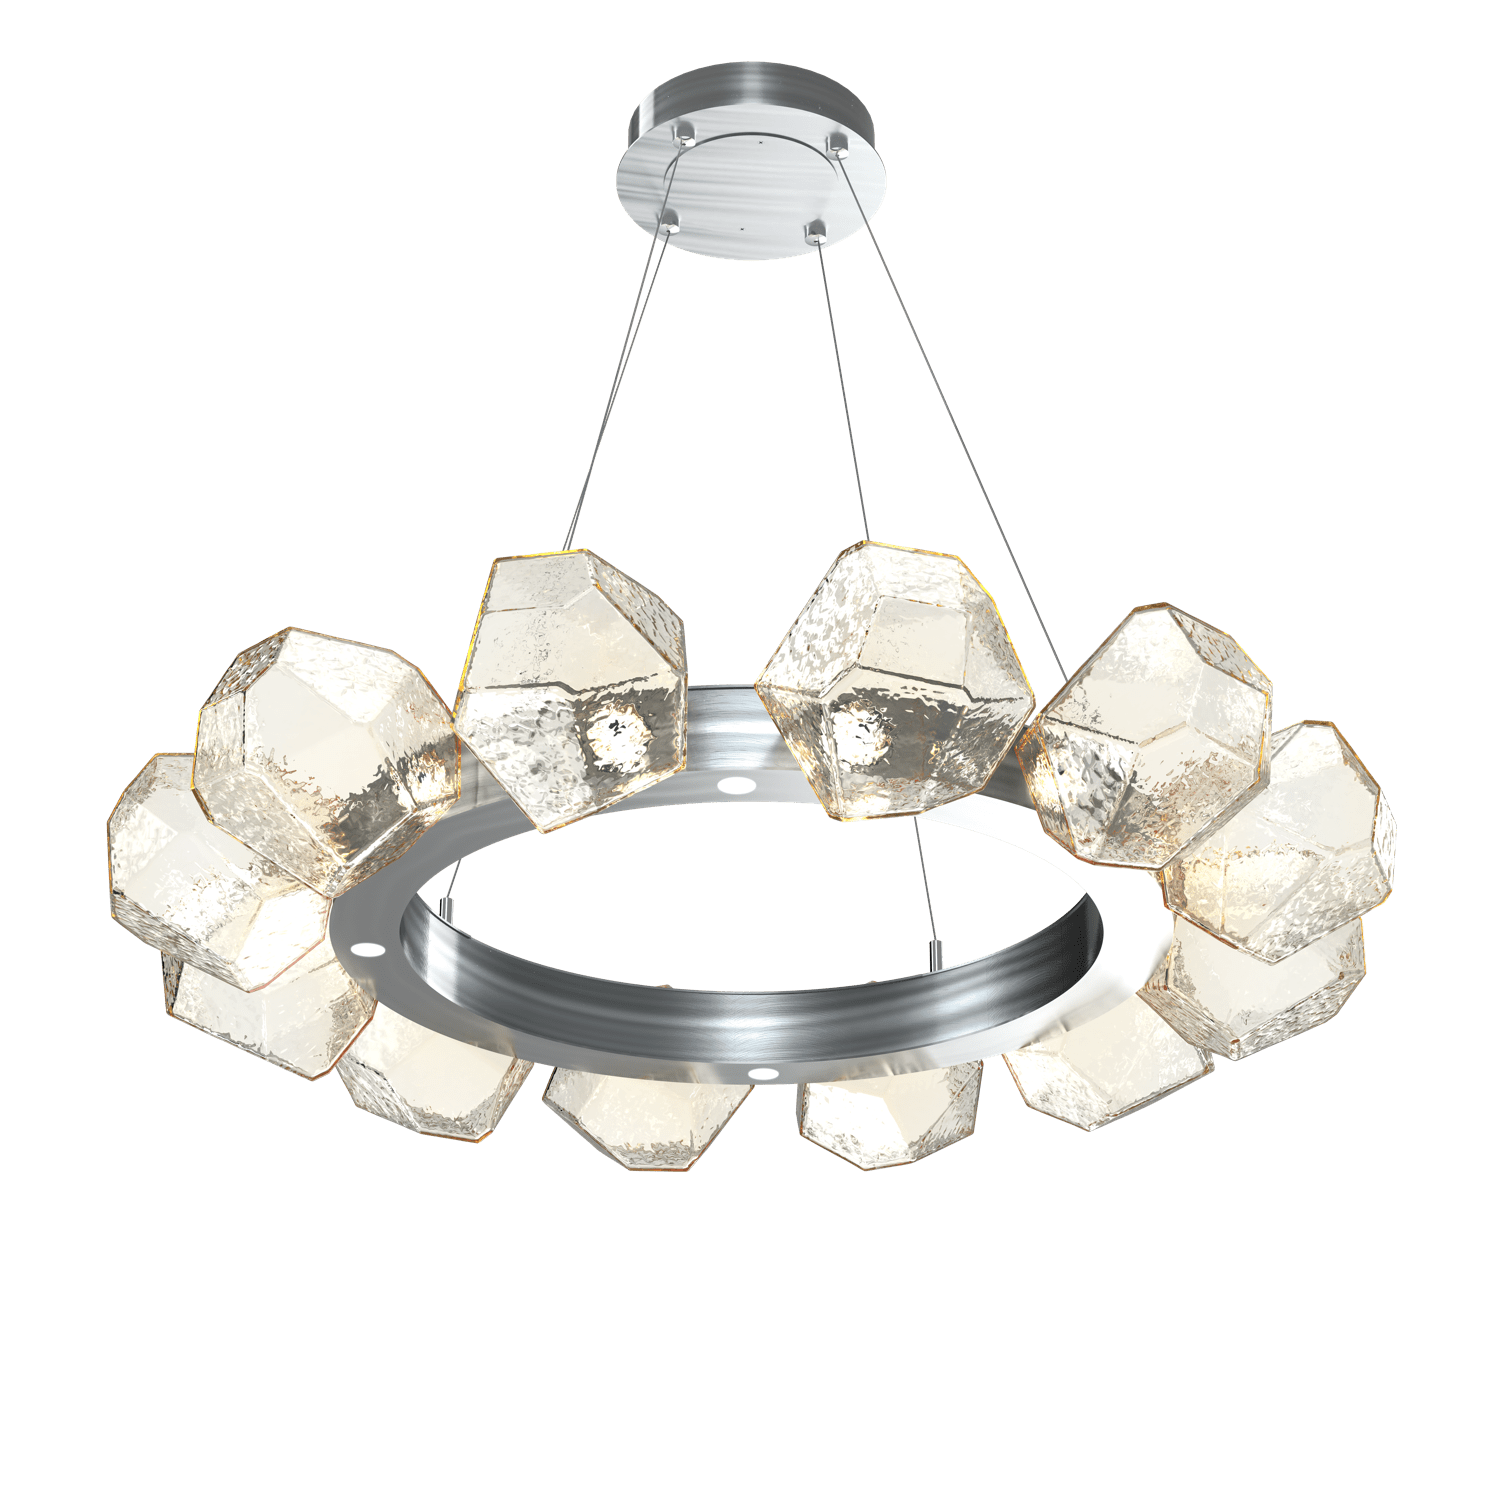 CHB0039-36-SN-A-Hammerton-Studio-Gem-36-inch-radial-ring-chandelier-with-satin-nickel-finish-and-amber-blown-glass-shades-and-LED-lamping